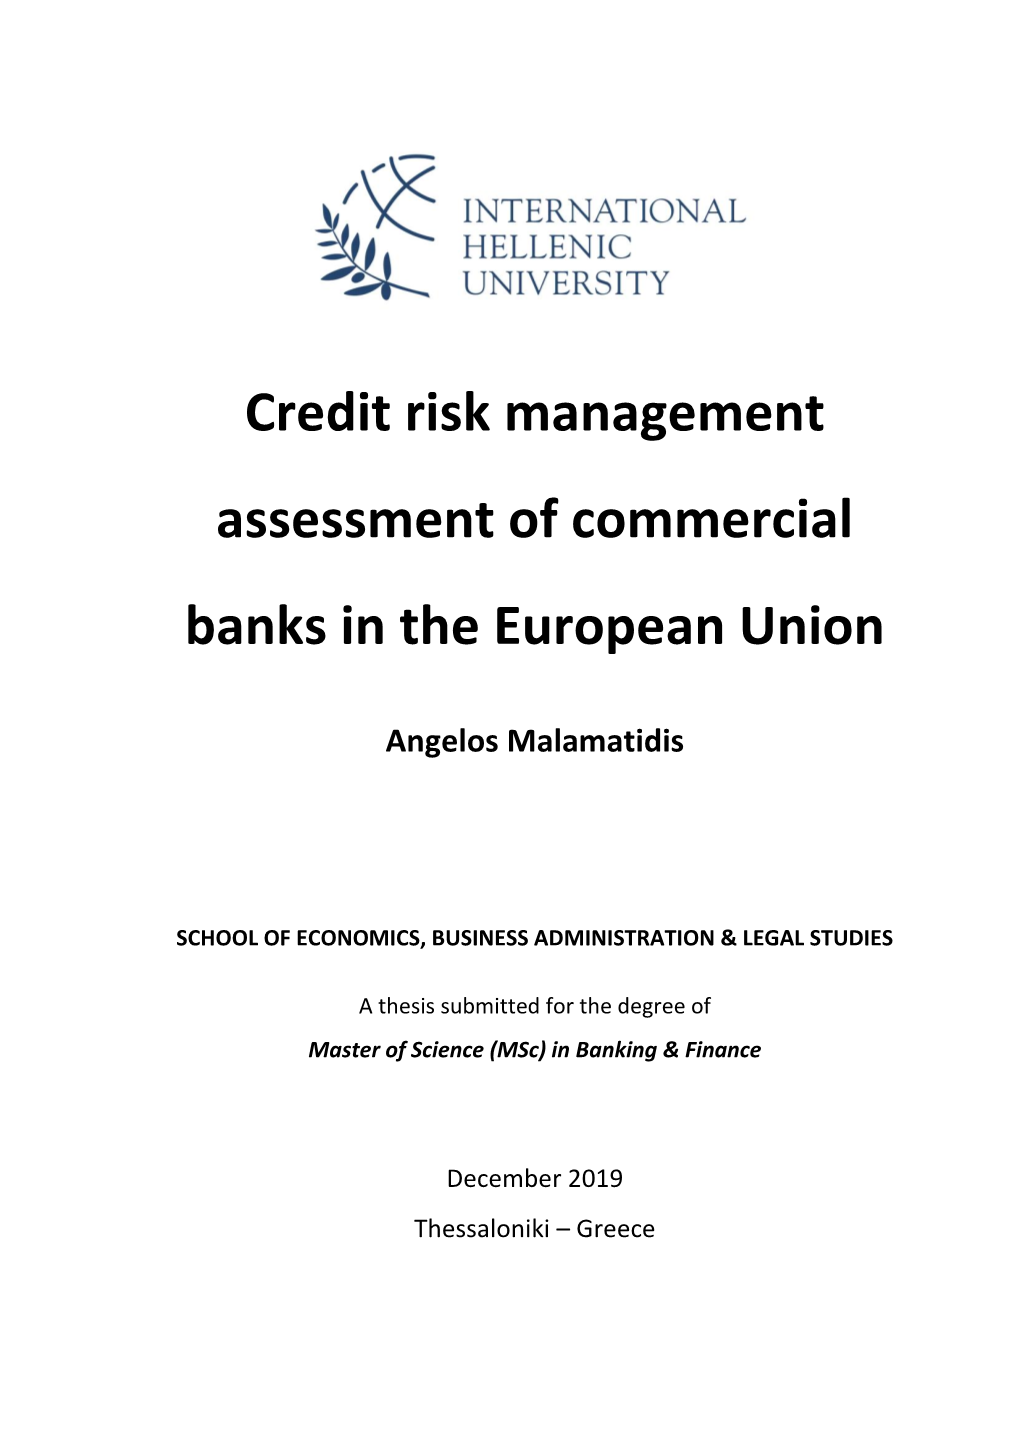 Credit Risk Management Assessment of Commercial Banks in the European Union